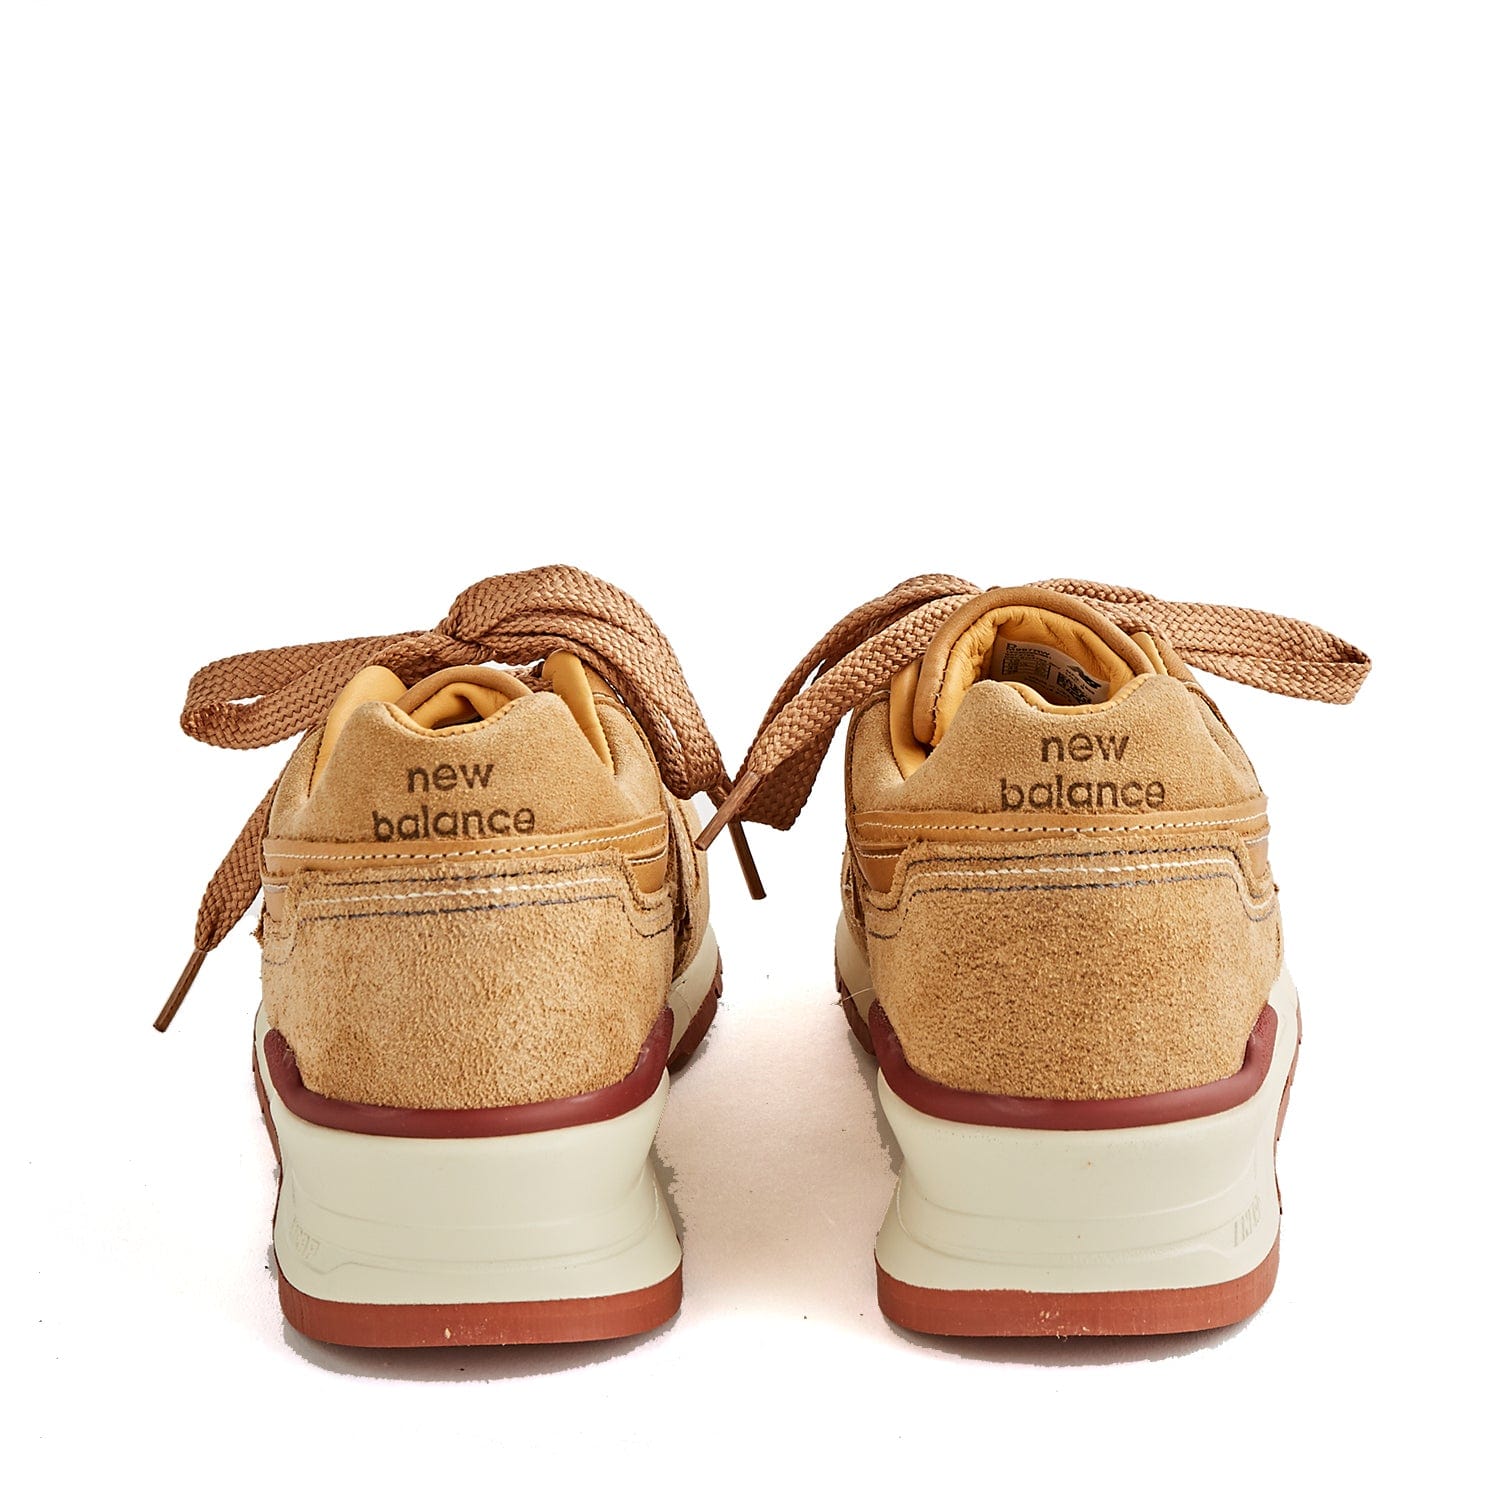 997 New Balance collaboration – Red Wing